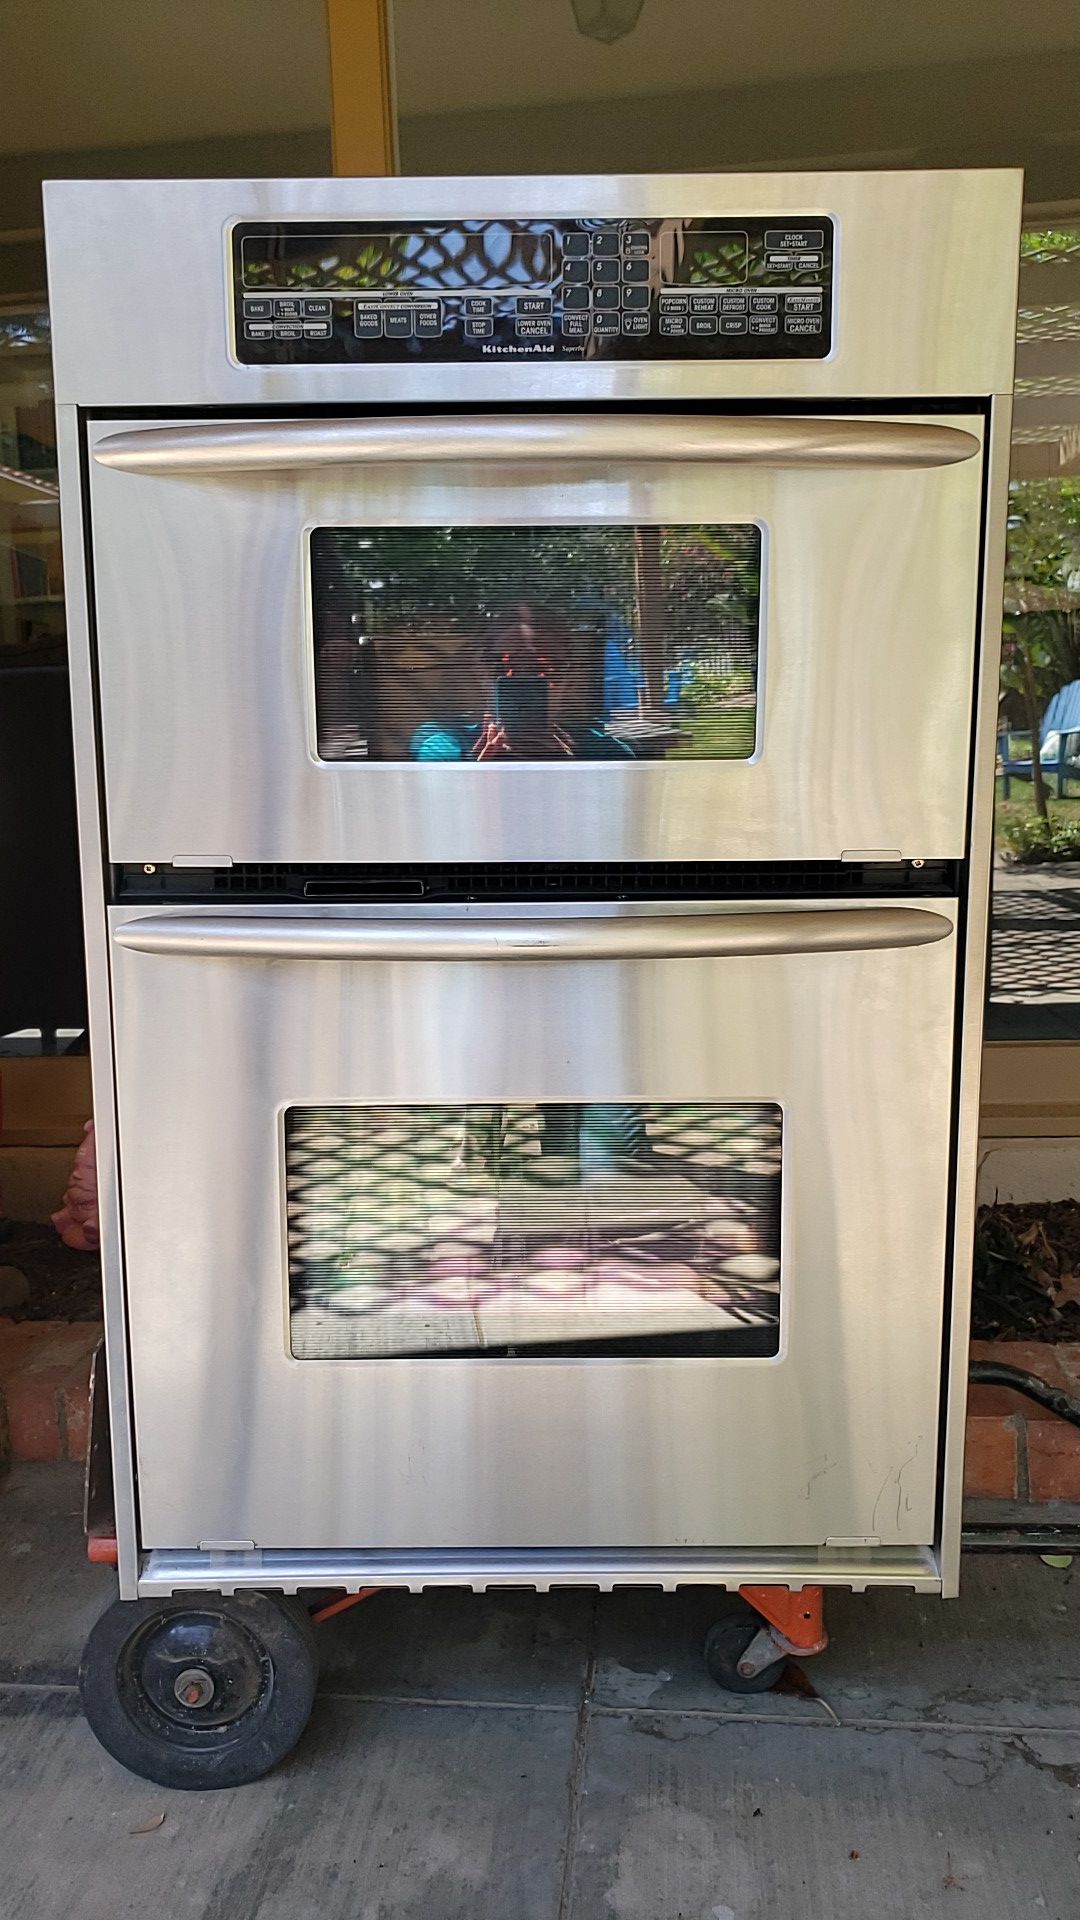 KitchenAid Superba Microwave Oven combo - doesn't work